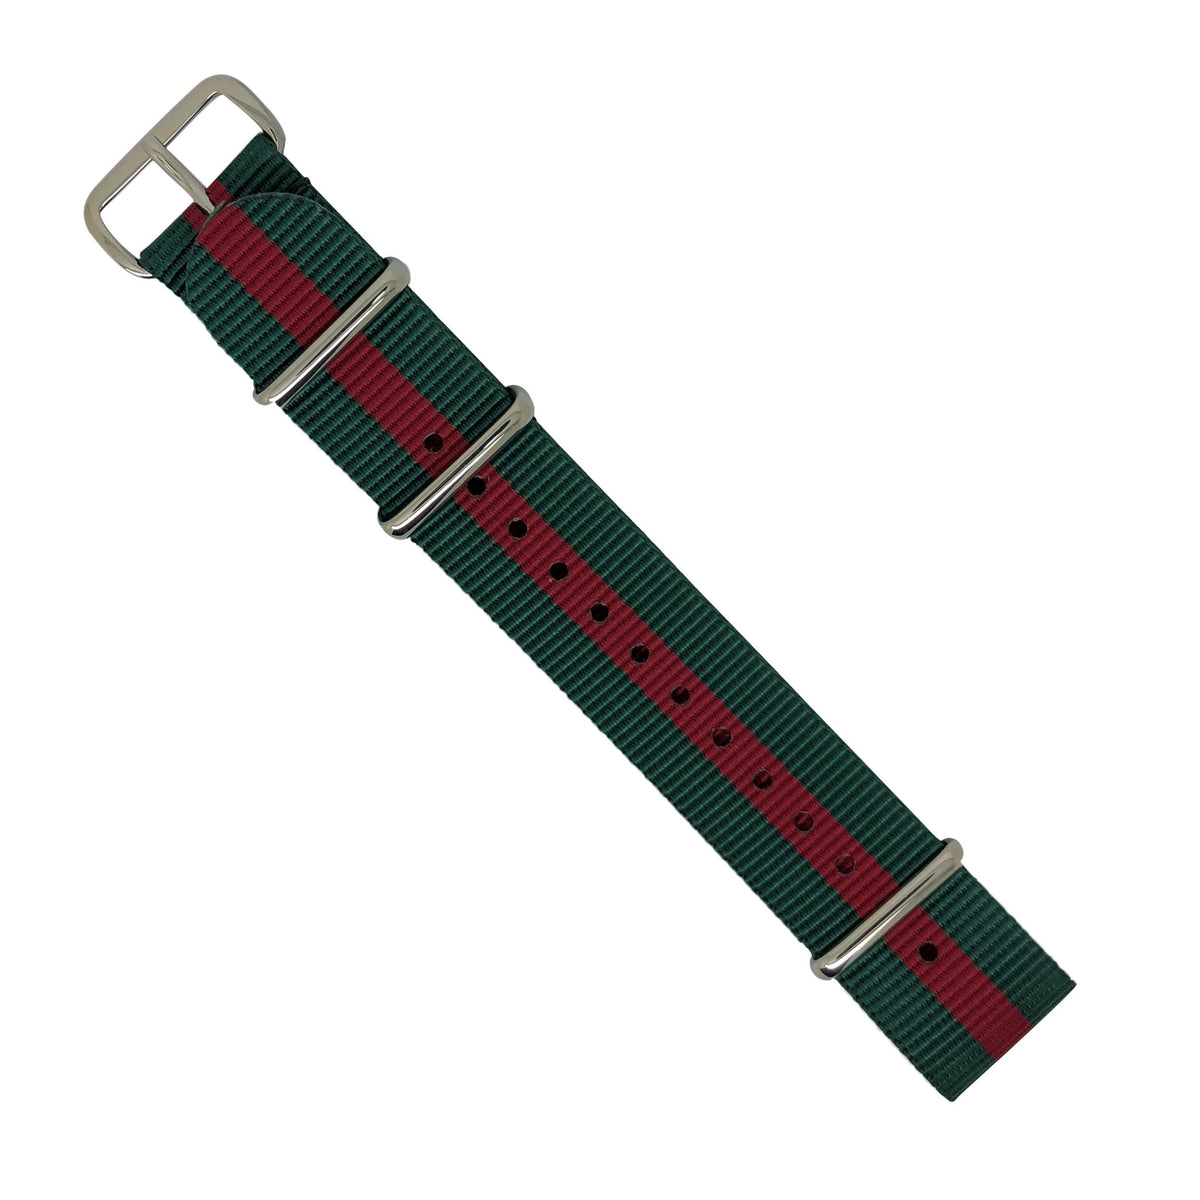 Premium Nato Strap in Green Red with Polished Silver Buckle (20mm) - Nomad Watch Works Malaysia